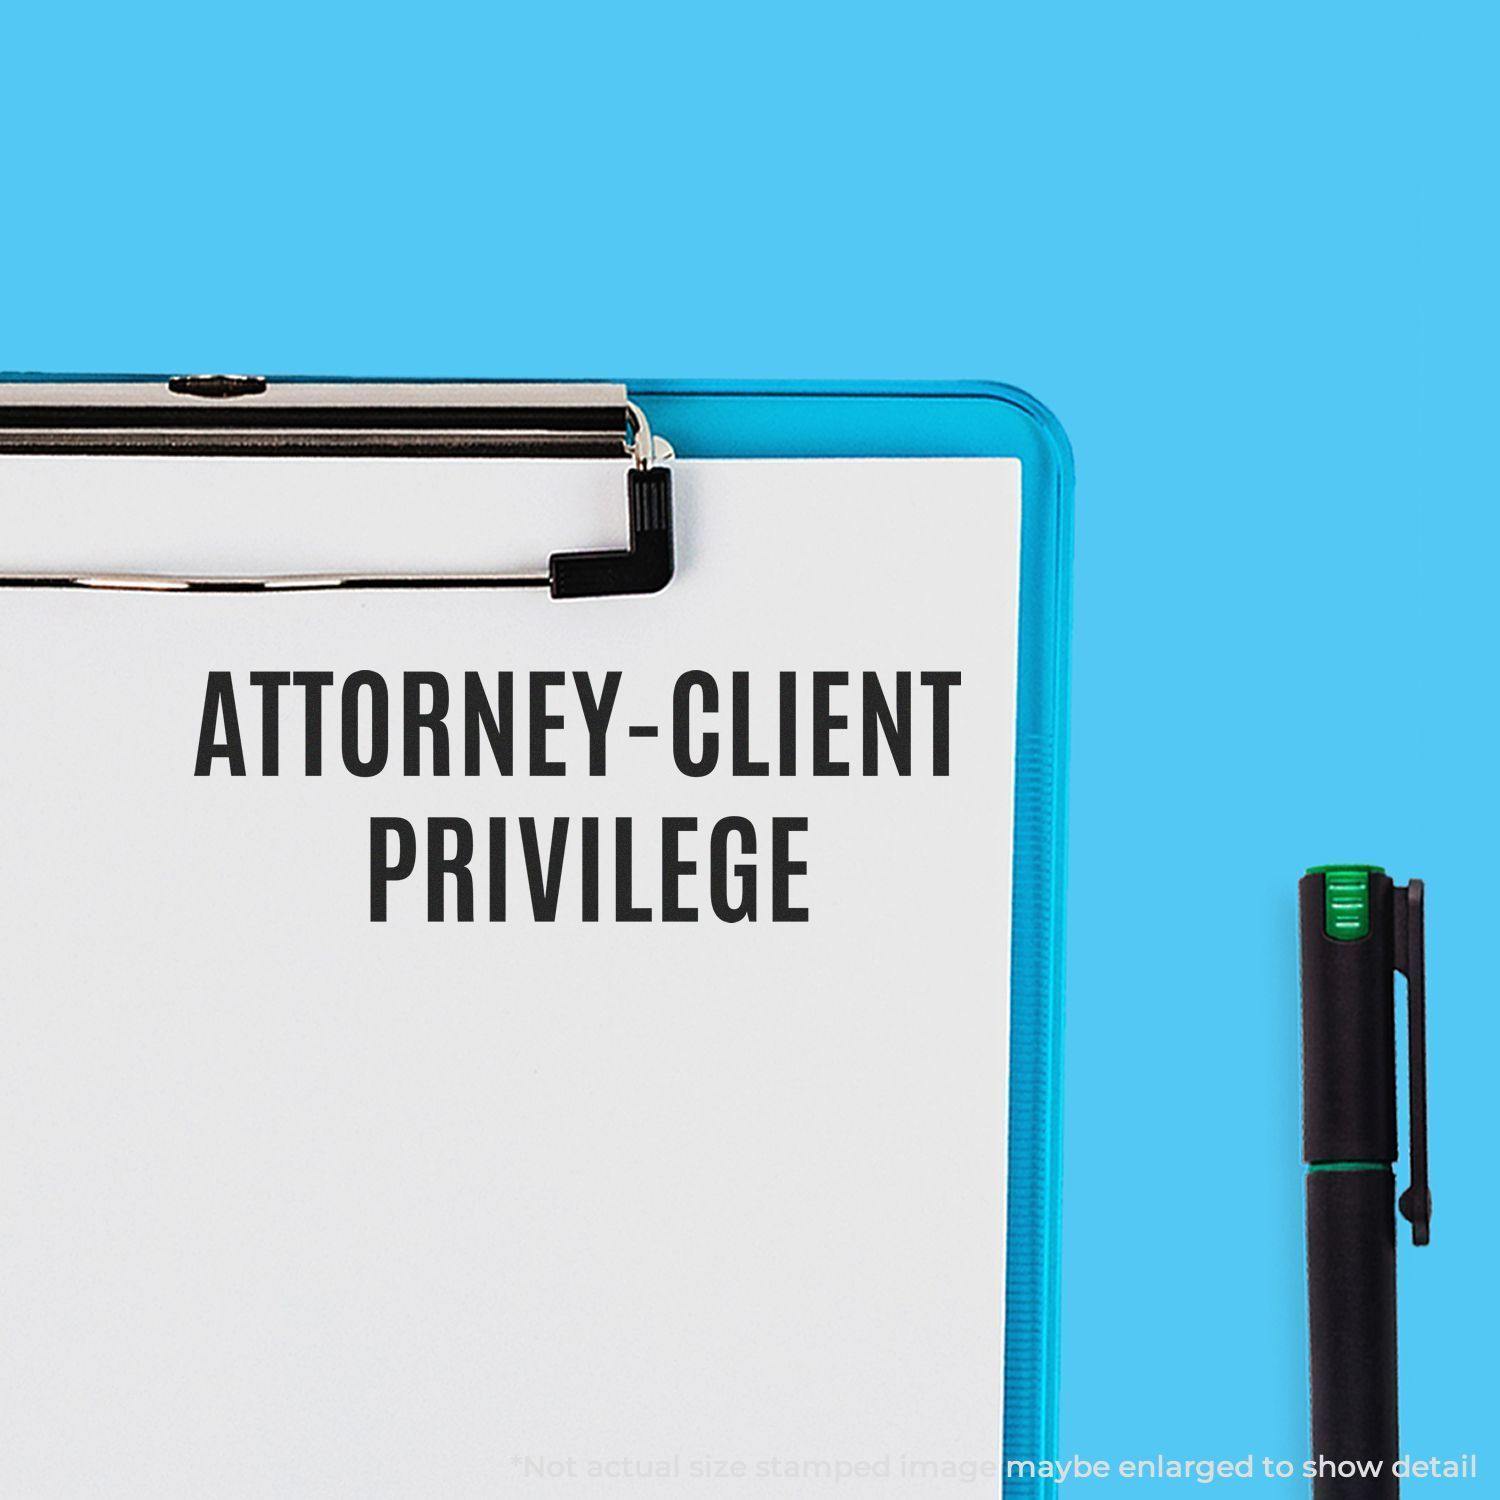 A stock office rubber stamp with a stamped image showing how the text "ATTORNEY-CLIENT PRIVILEGE" is displayed after stamping.